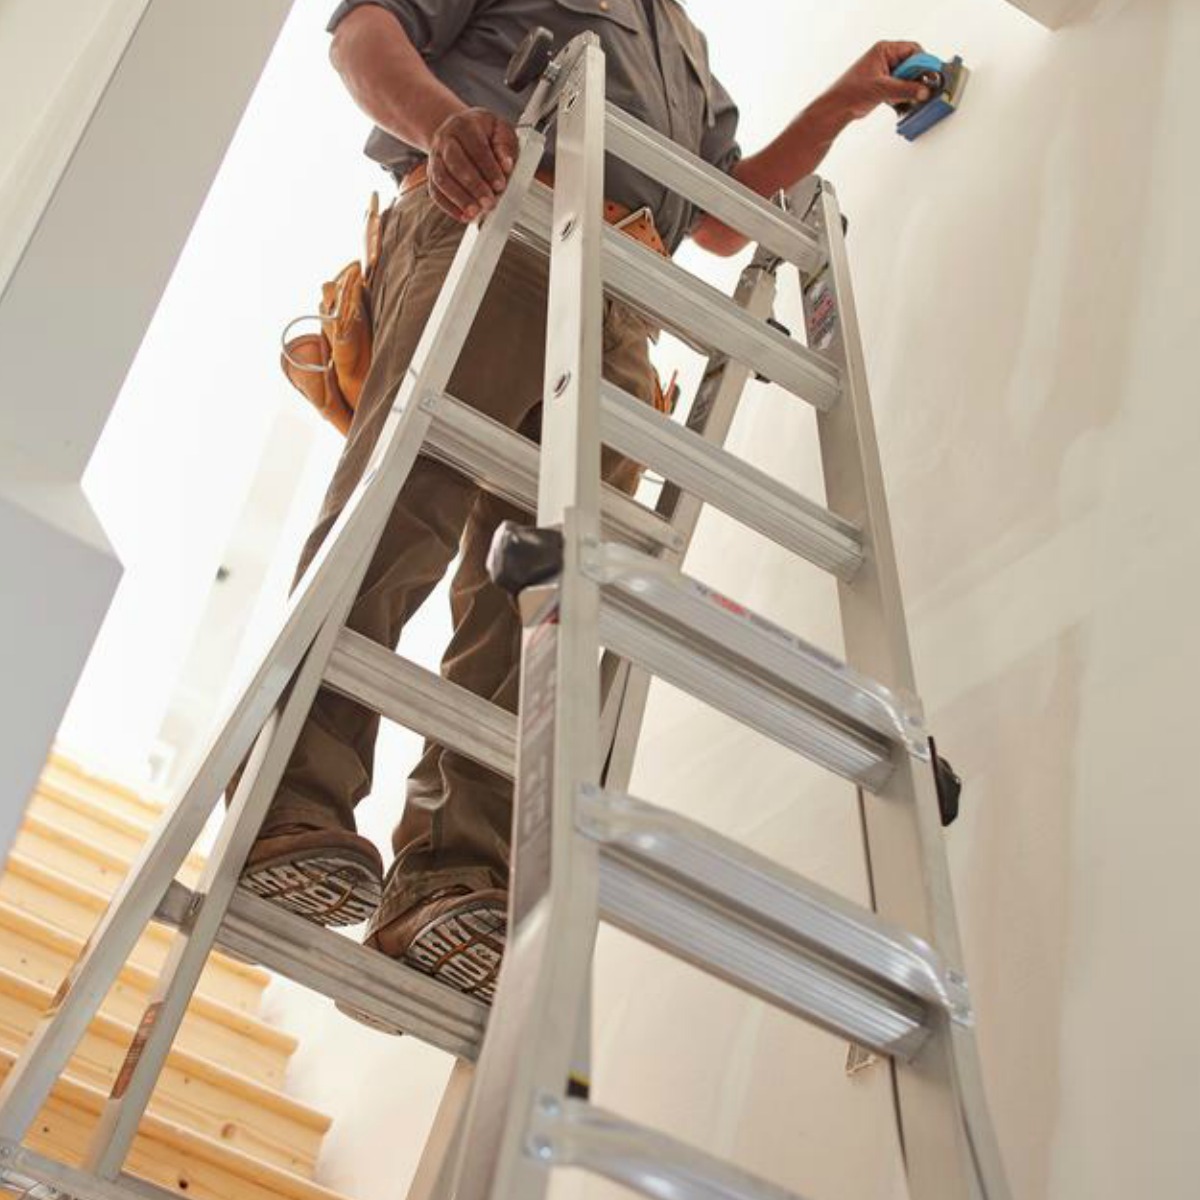 man standing on a ladder in a hallway 